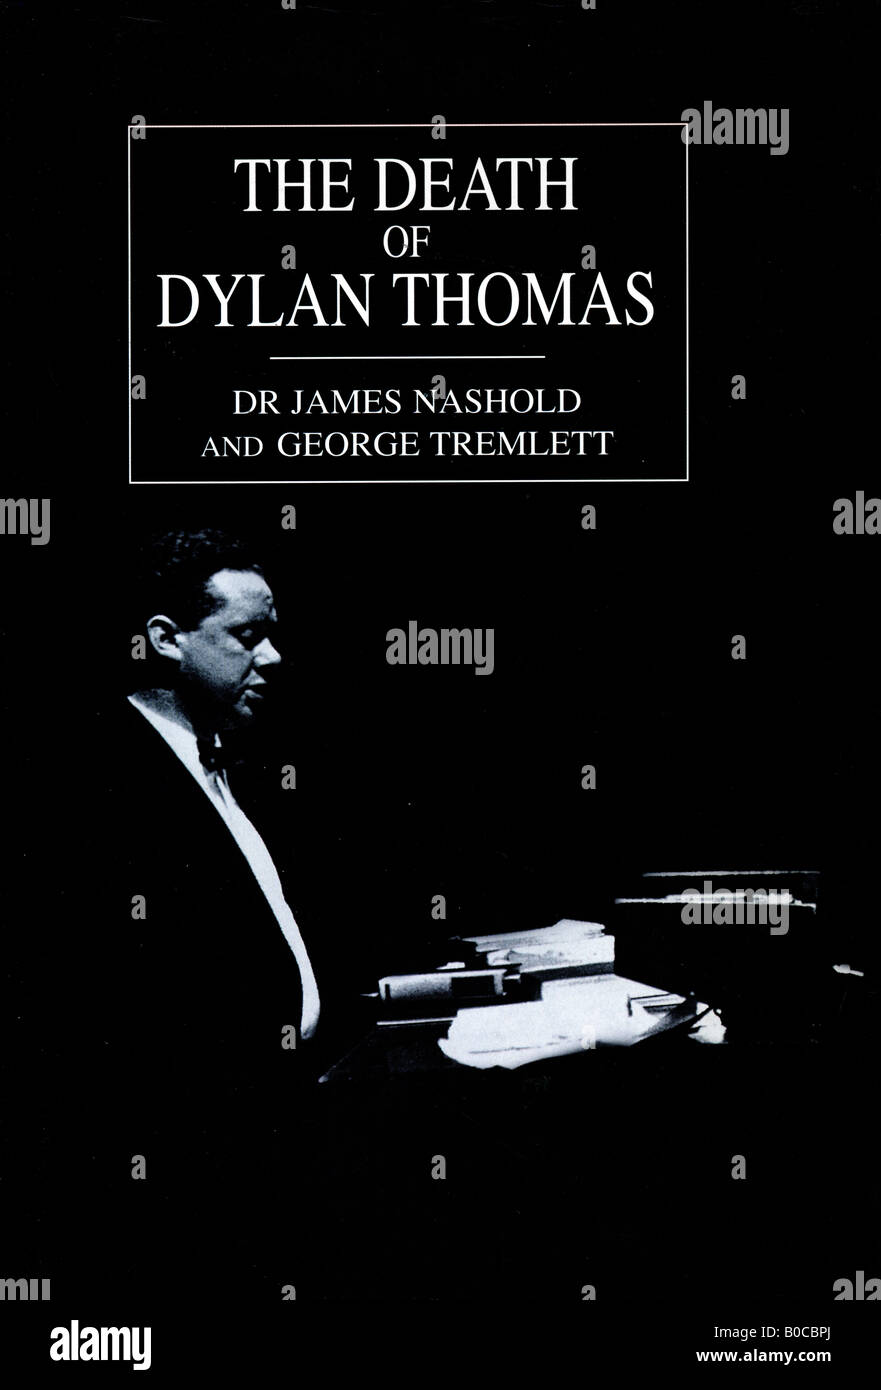 The Death of Dylan Thomas by Dr James Nashold and George Tremlett Hardback Book 1997  FOR EDITORIAL USE ONLY Stock Photo